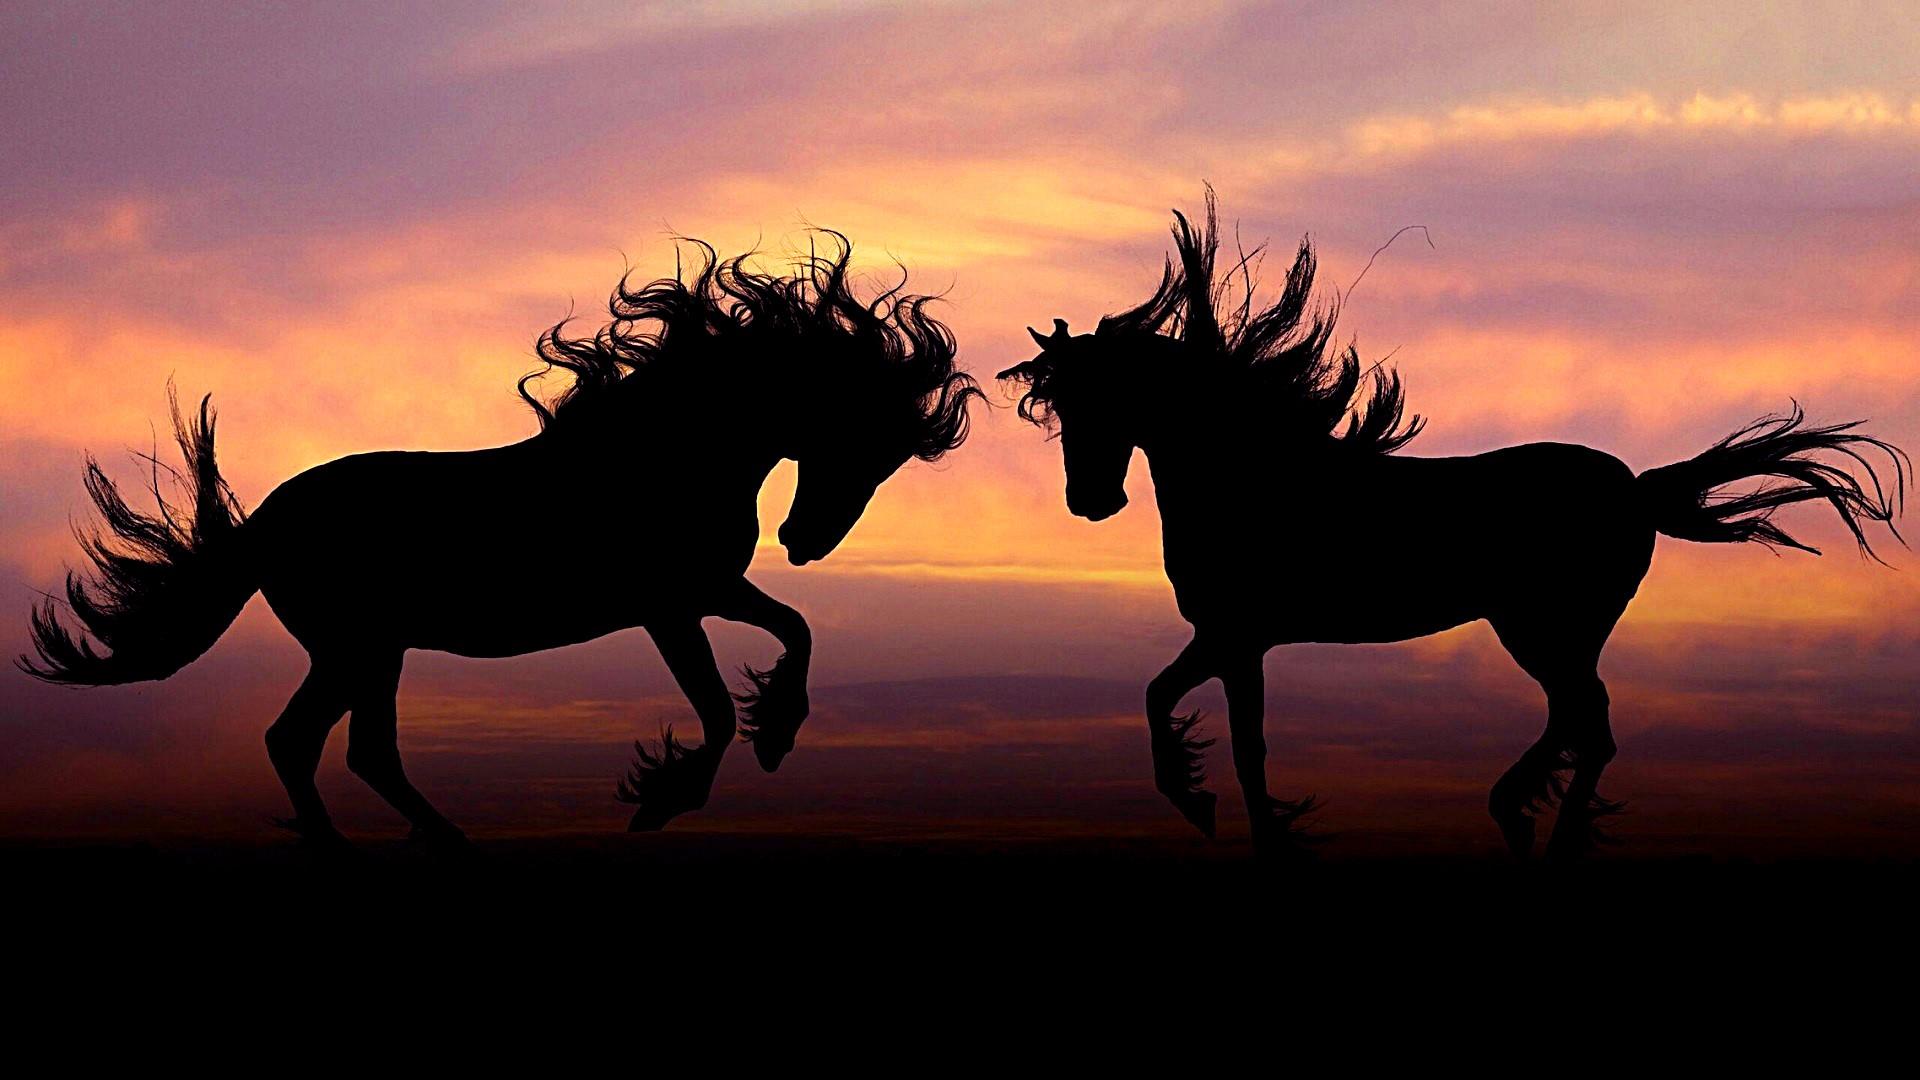 Free download Horse Couple In The Sunset Wallpaper Studio 10 [1920x1080] for your Desktop, Mobile & Tablet. Explore Horses at Sunset Wallpaper. Horses at Sunset Wallpaper, Sunset At